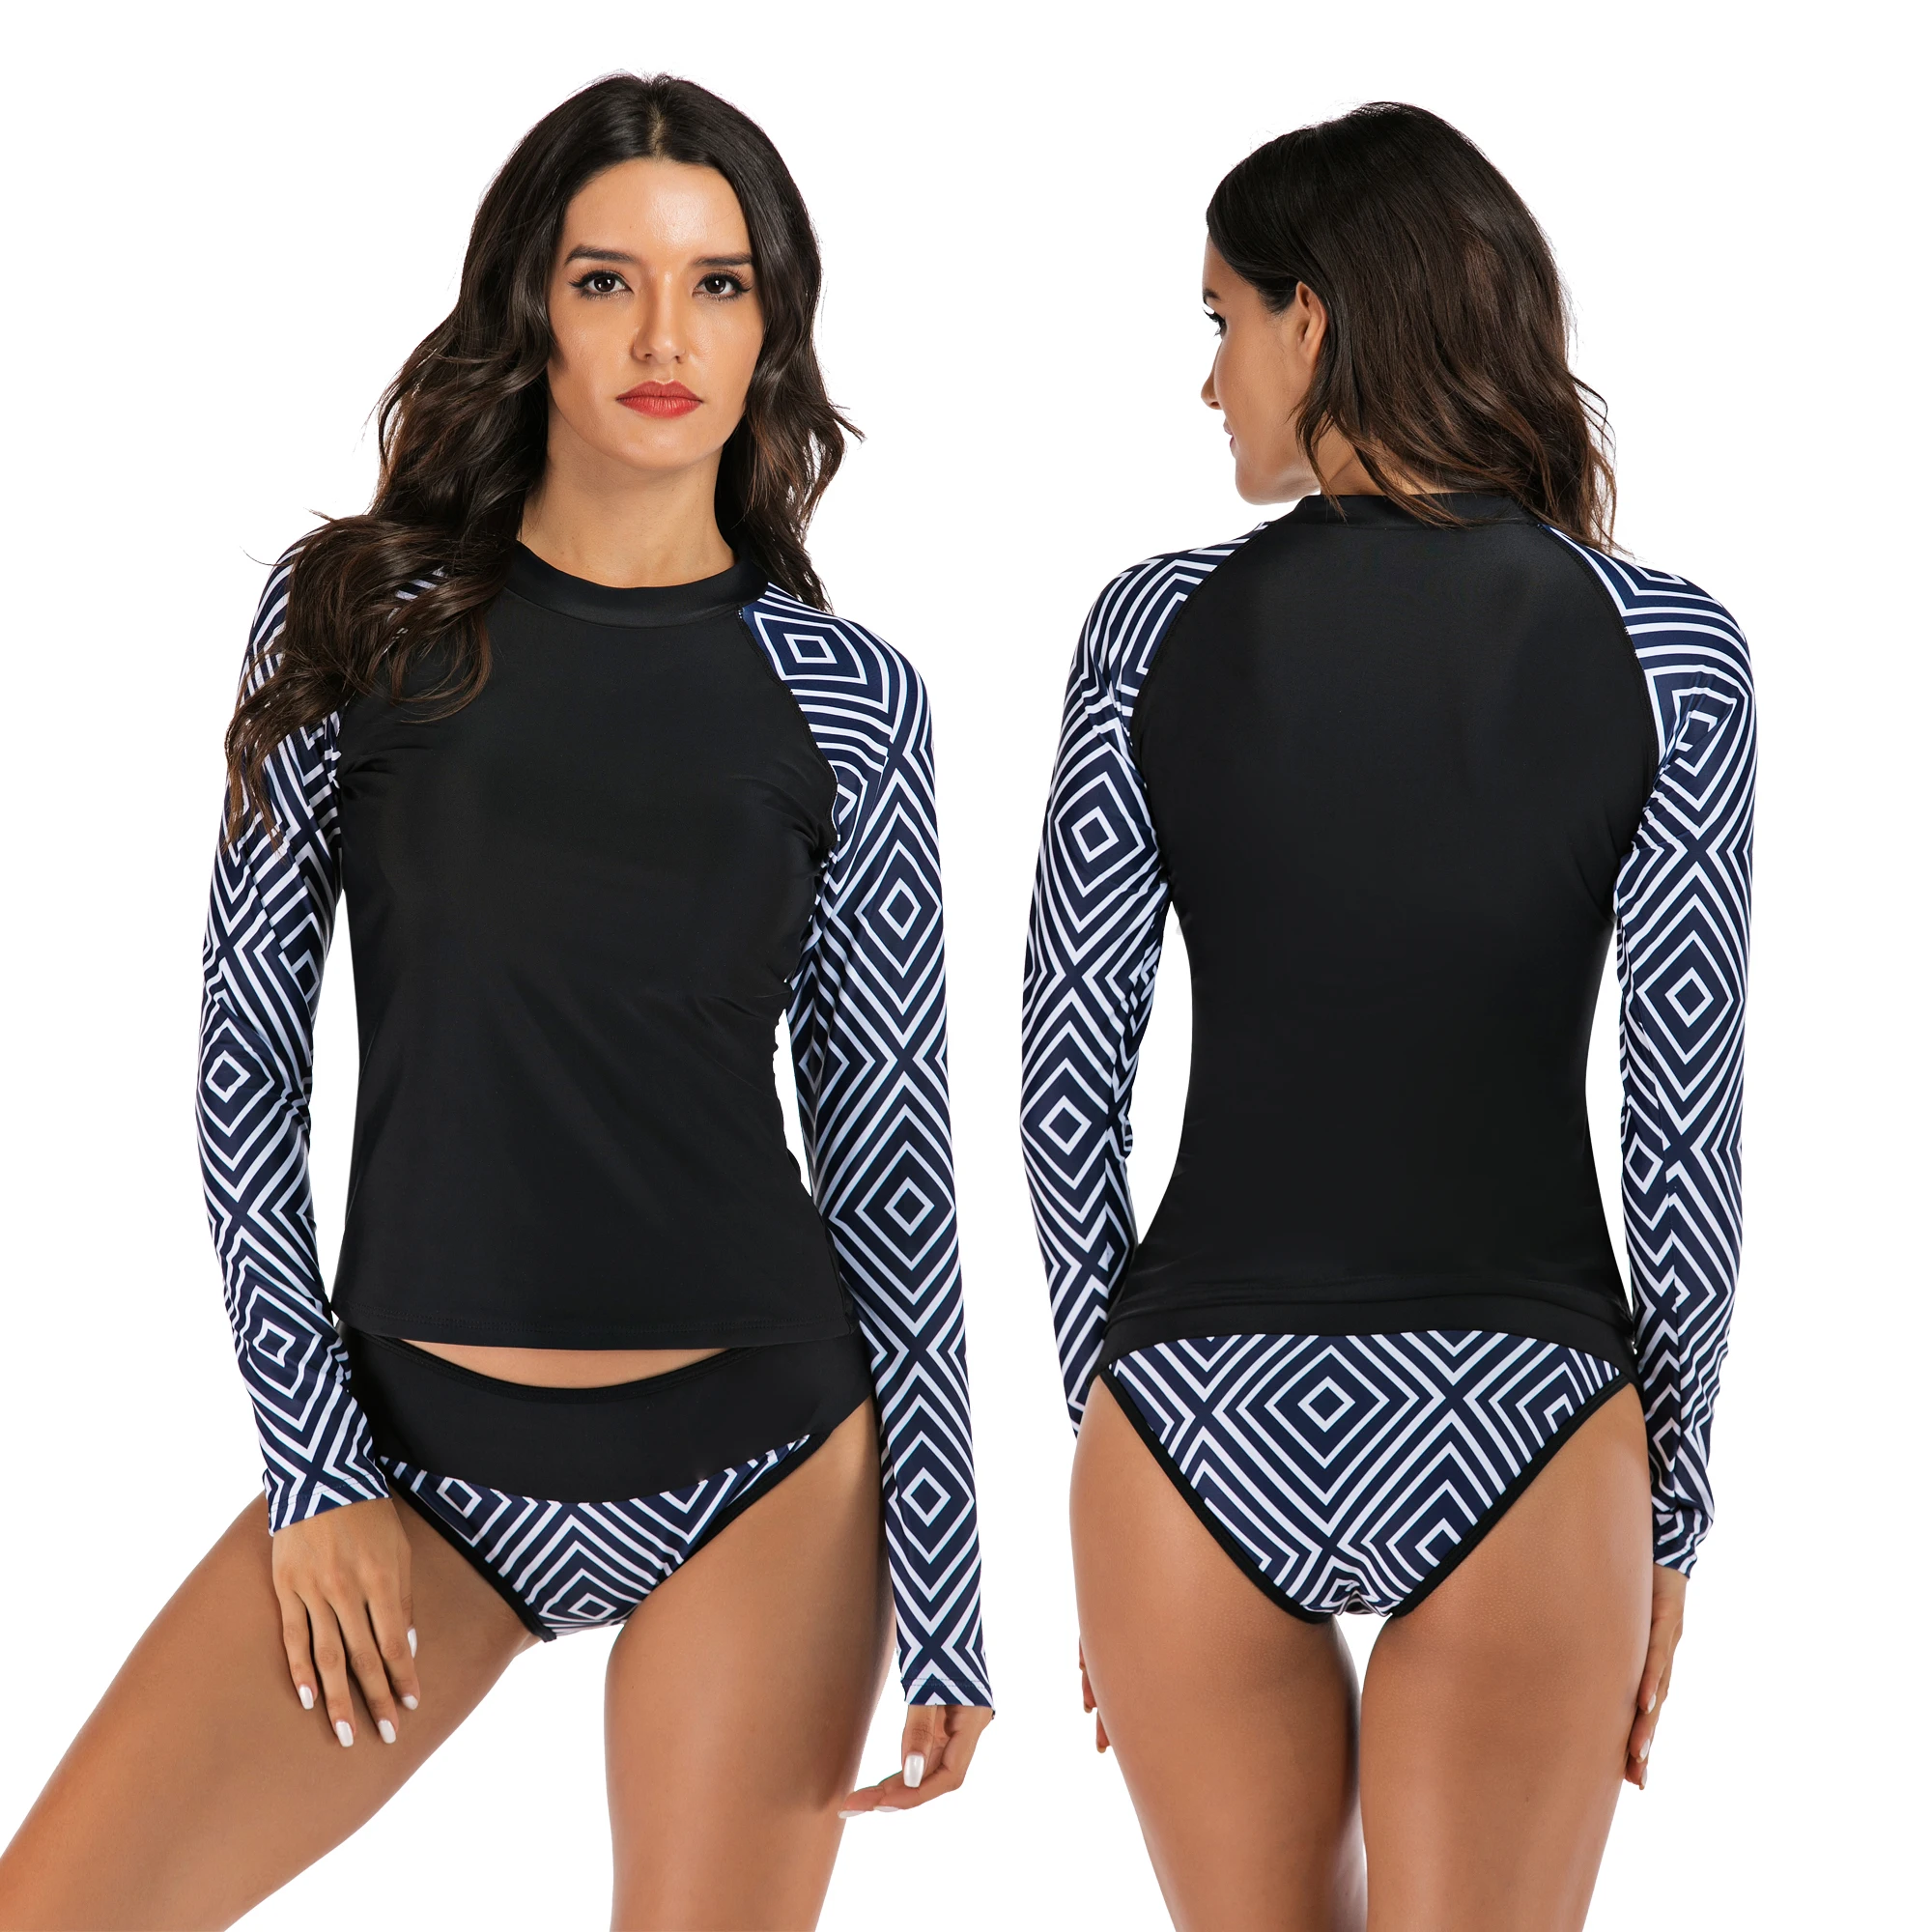 Surf Swimsuit Plus Size,SMALLE◕‿◕ Womens Long Sleeves Rash Guard Athletic Swim Floral Print Quick-Drying Surf Swimsuit 